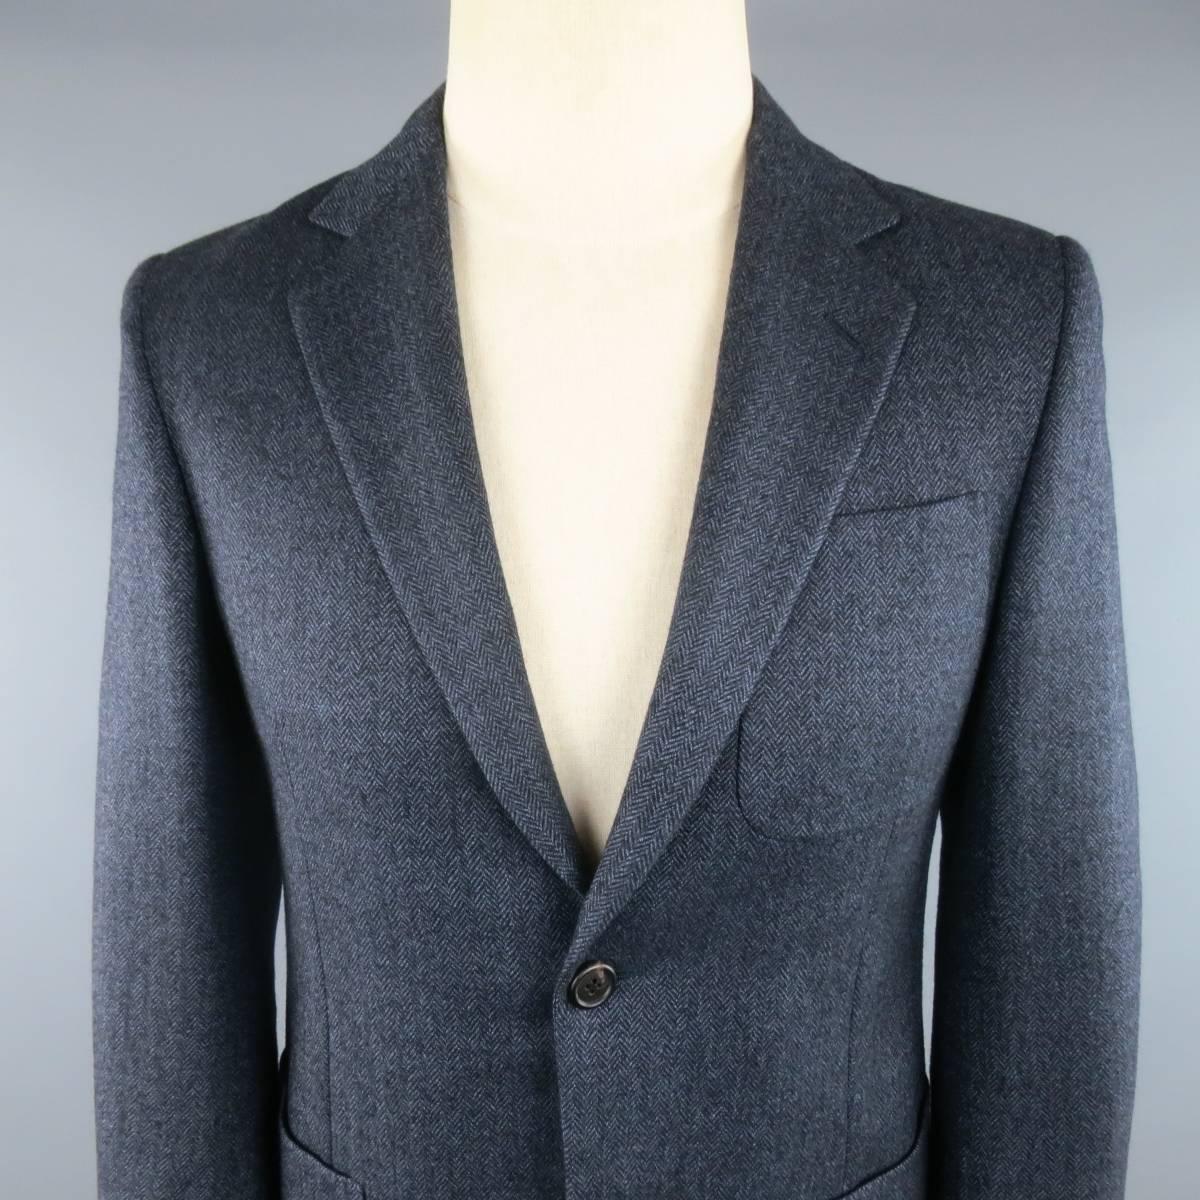 PRADA sport coat comes in a muted ash blue herringbone wool and features a notch lapel, two button closure, triple patch pockets. and functional button cuff sleeves. Made in Italy. Retails at $2440.00.
 
Excellent Pre-Owned Condition.
Marked: IT